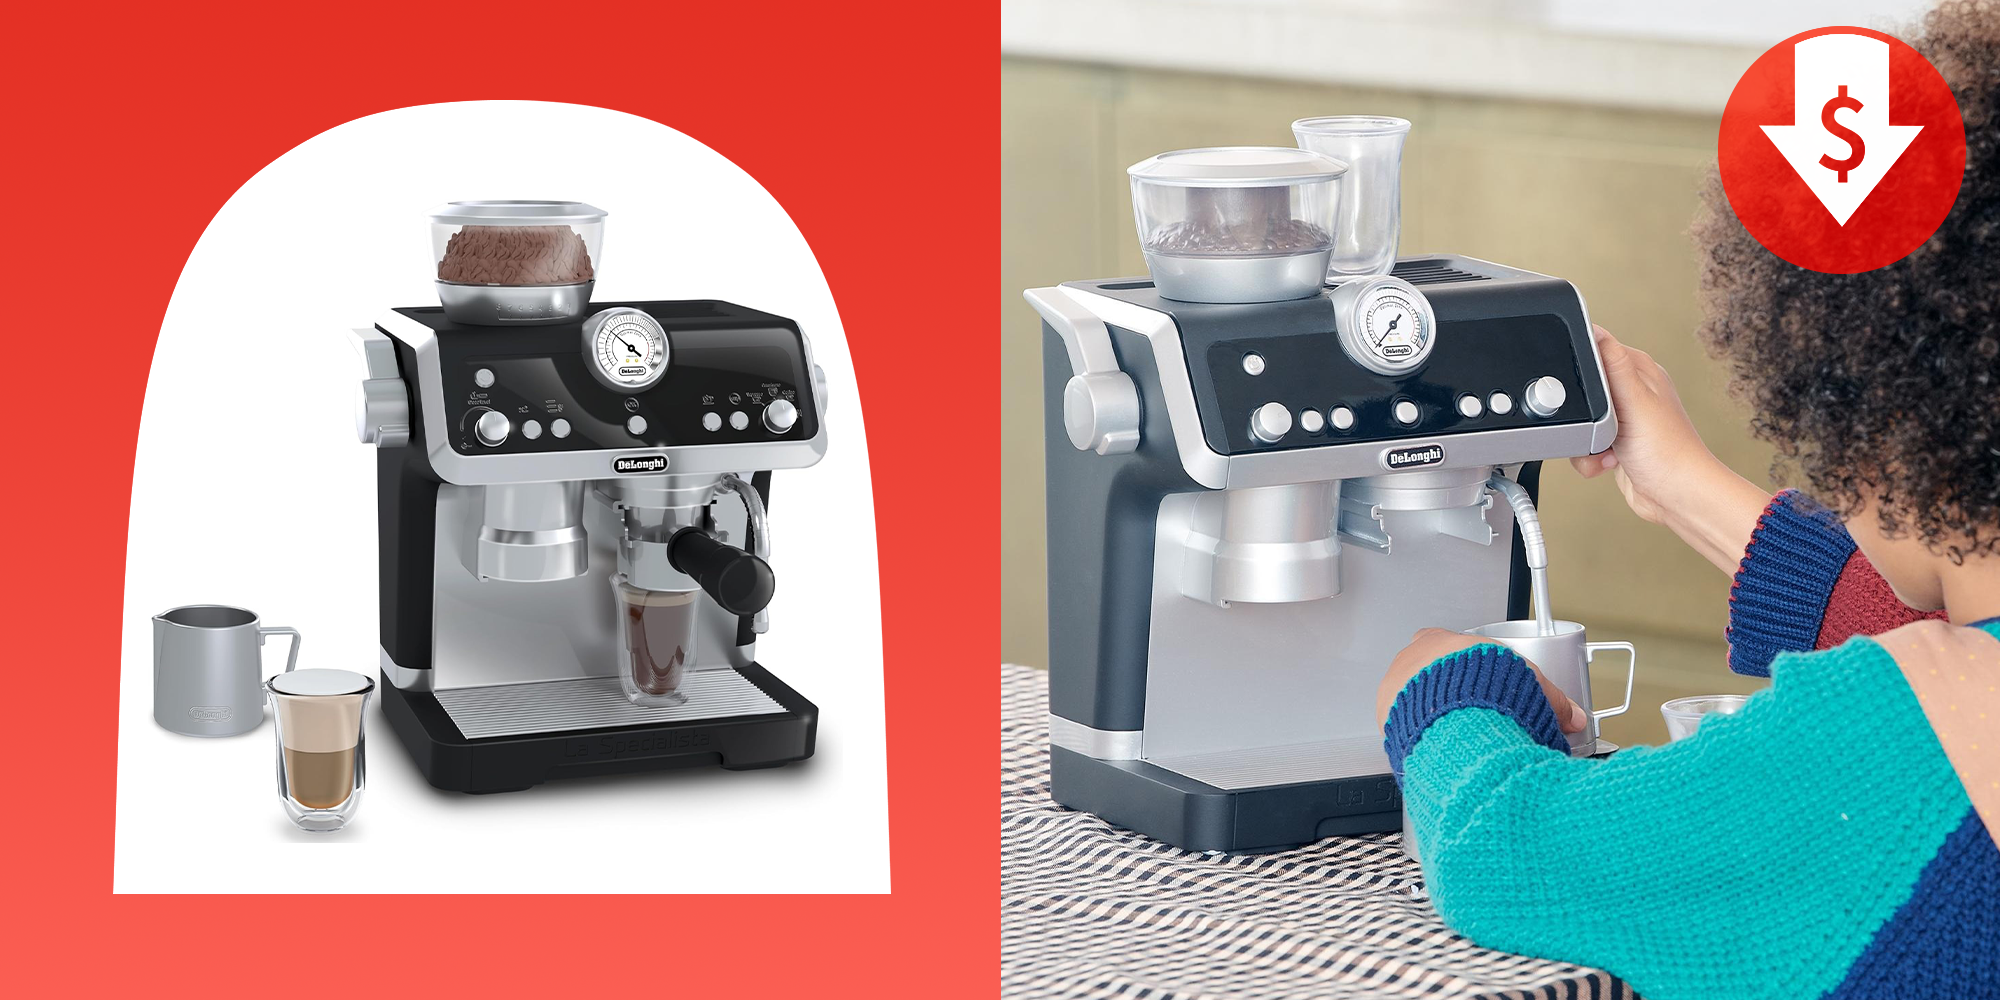 Casdon De'Longhi Toys Barista Coffee Machine. Toy Kitchen Playset for Kids  with Moving Parts, Realistic Sounds and Magic Coffee Reveal. For Children